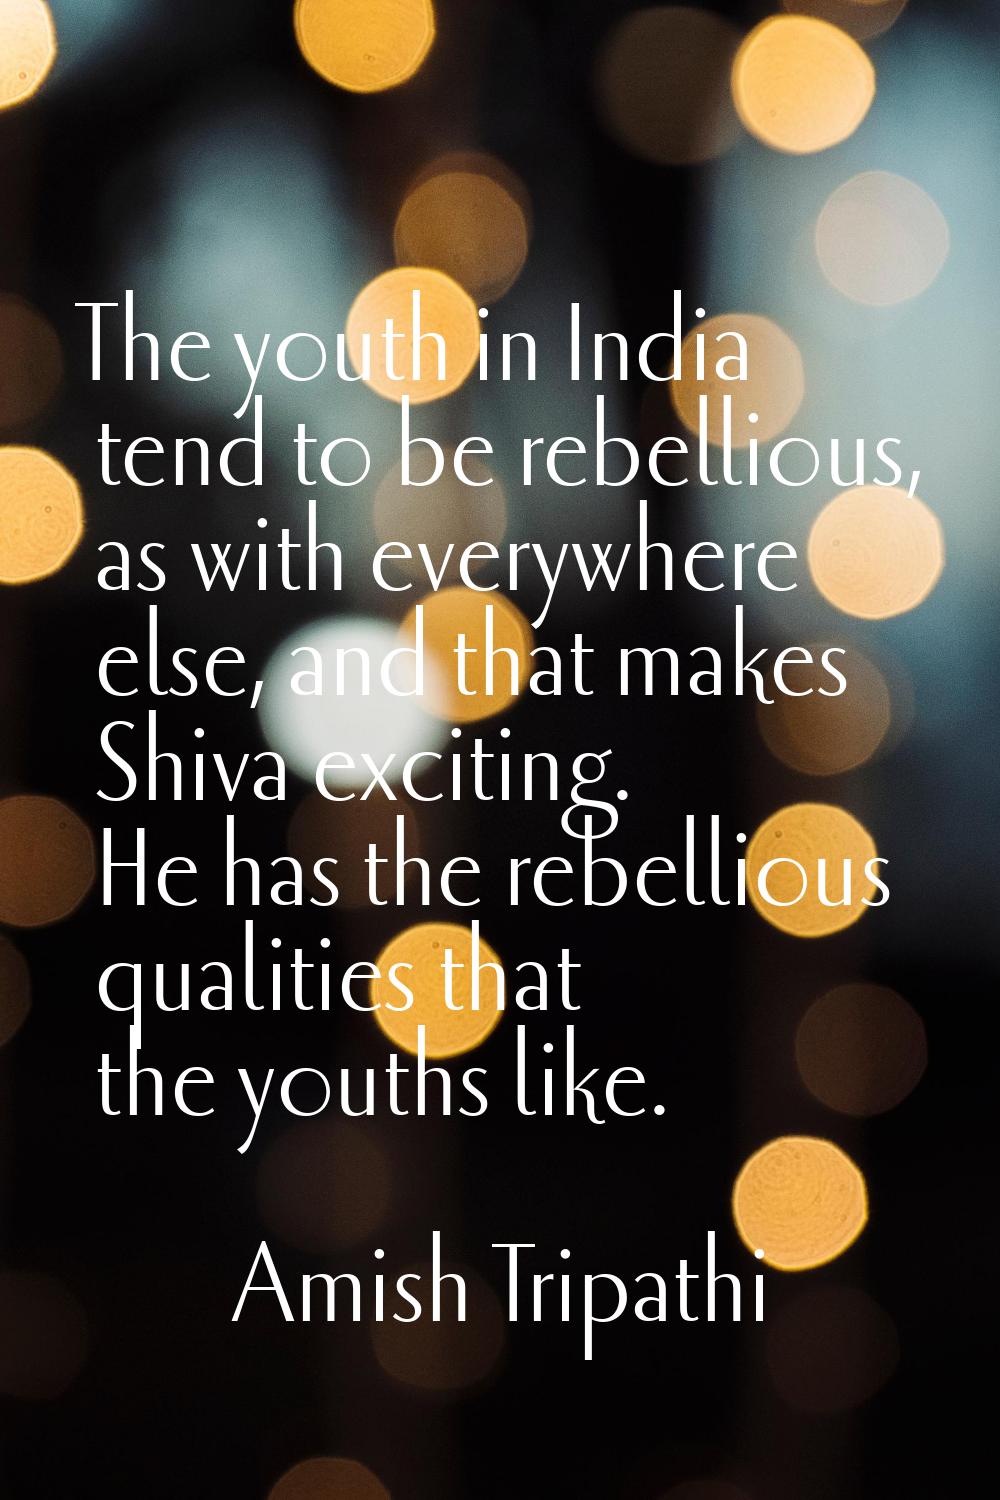 The youth in India tend to be rebellious, as with everywhere else, and that makes Shiva exciting. H